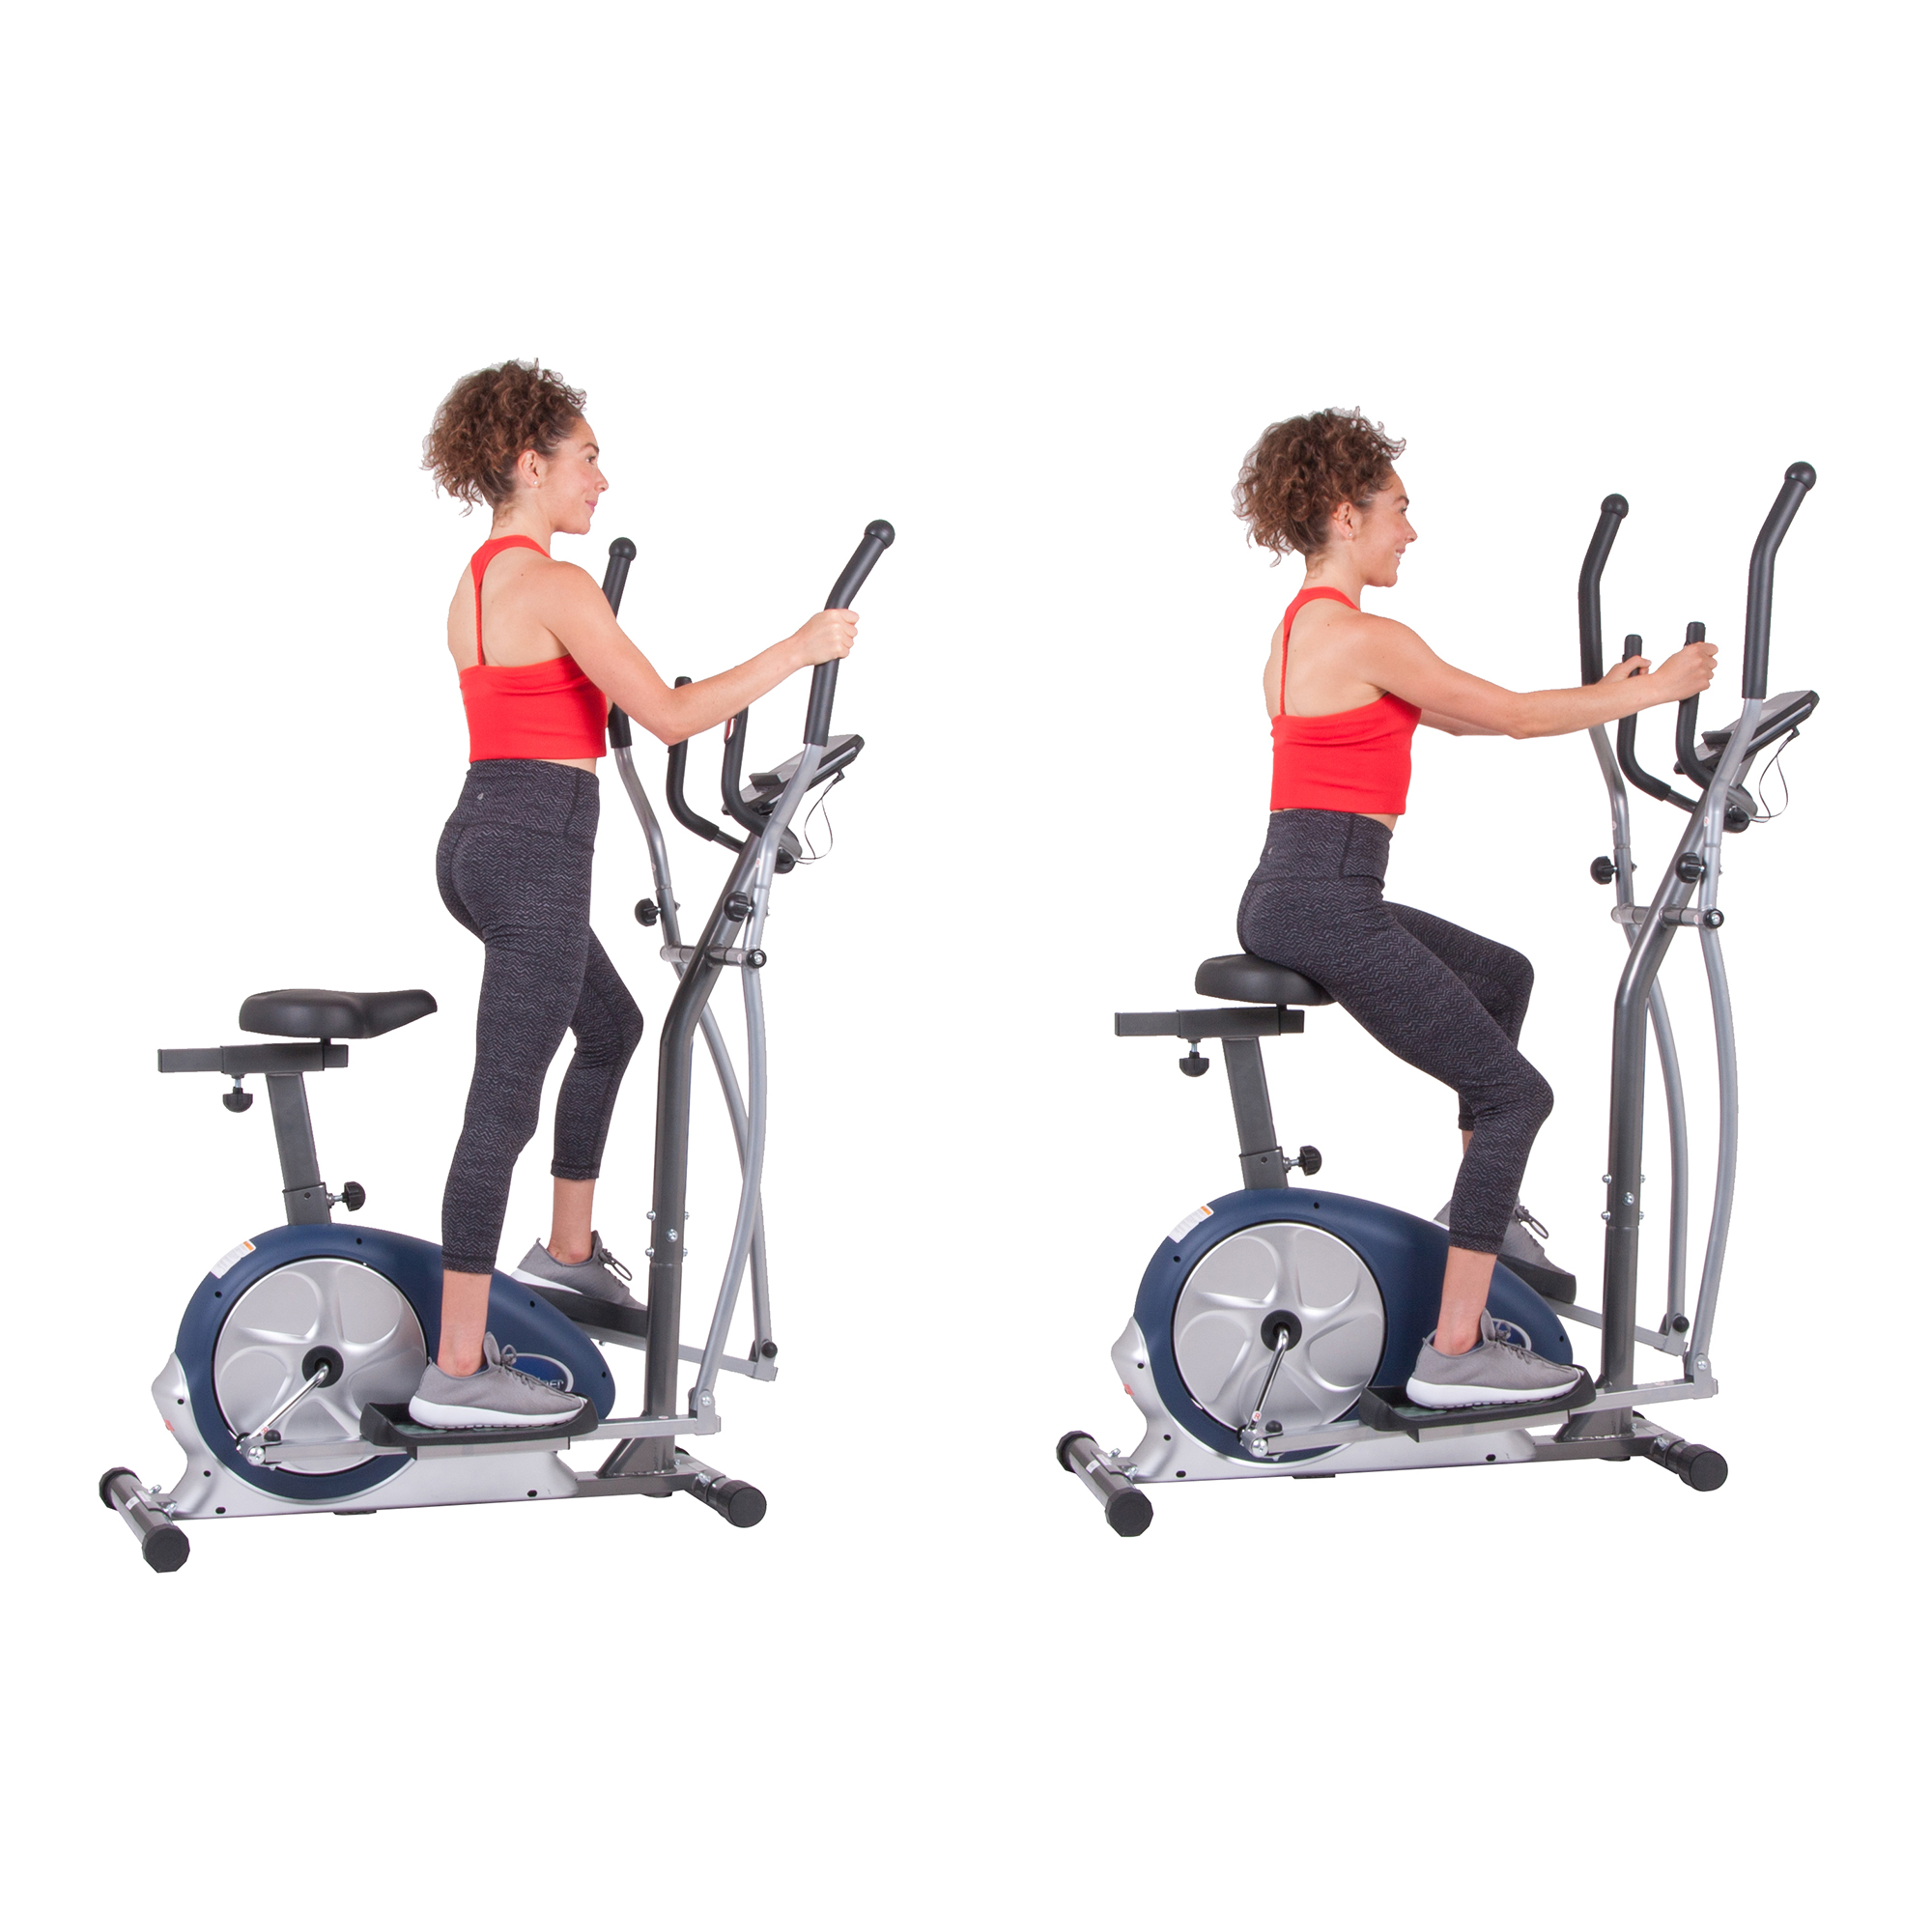 Body Champ BRM3671 Elliptical and Exercise Bike Dual Trainer - image 1 of 8